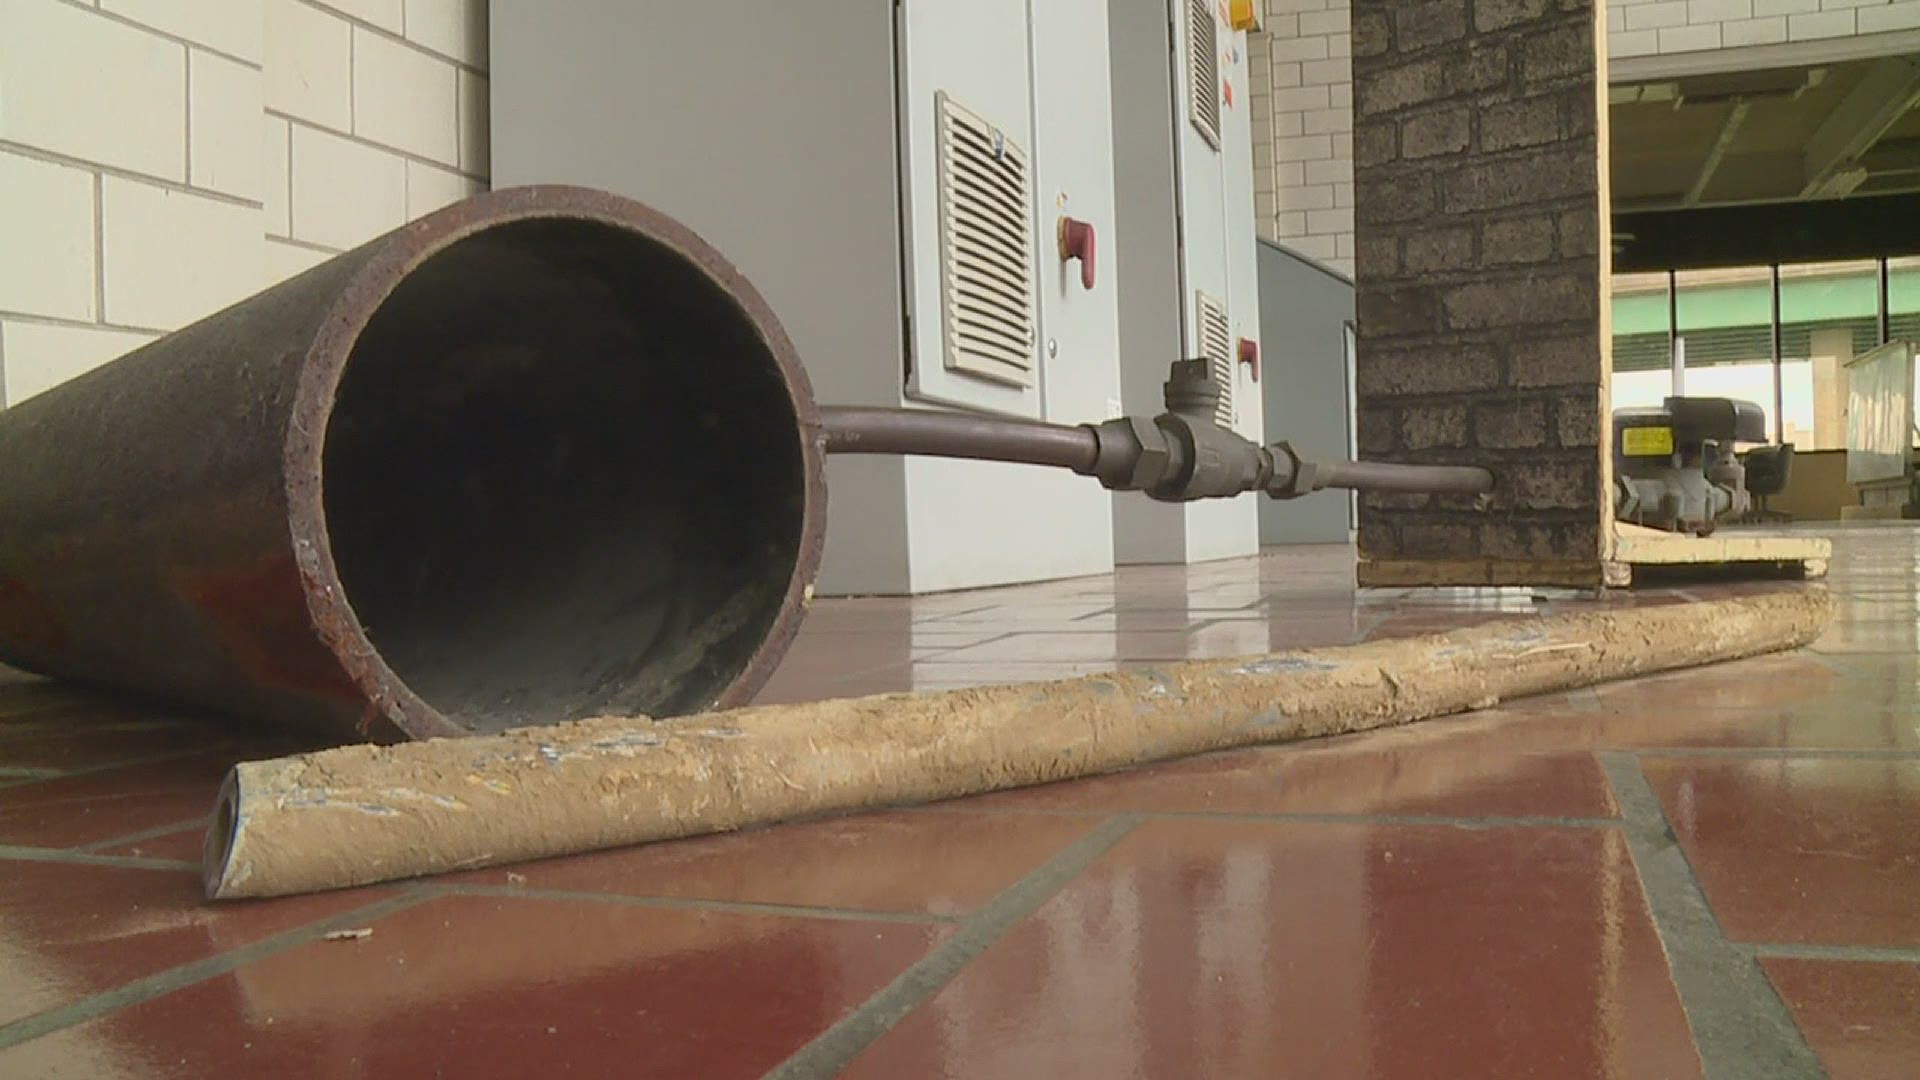 Illinois has the most lead water service pipes in the country... for now. A new law will change that eventually, but Moline is slowly beginning construction.